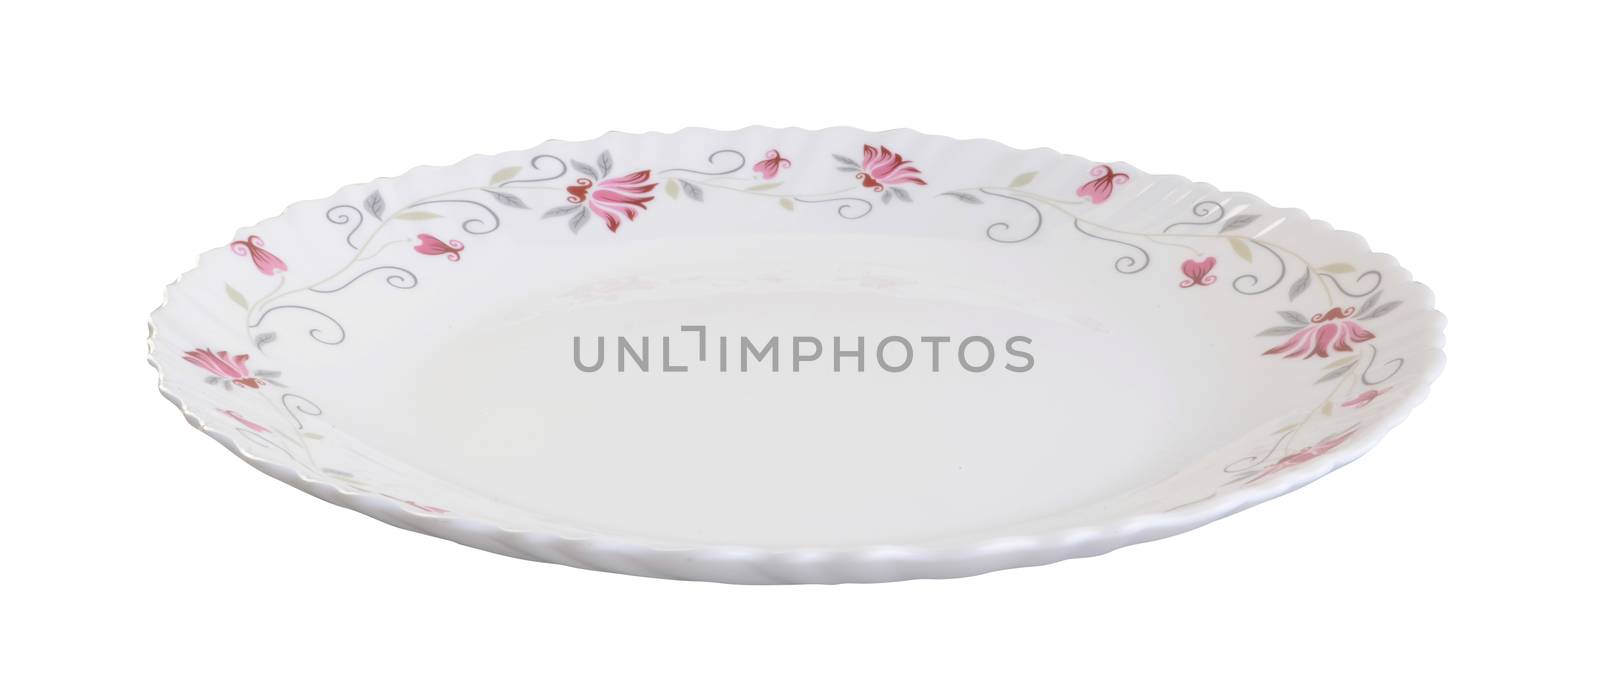 plate, plate on background. ceramic plate on a background.